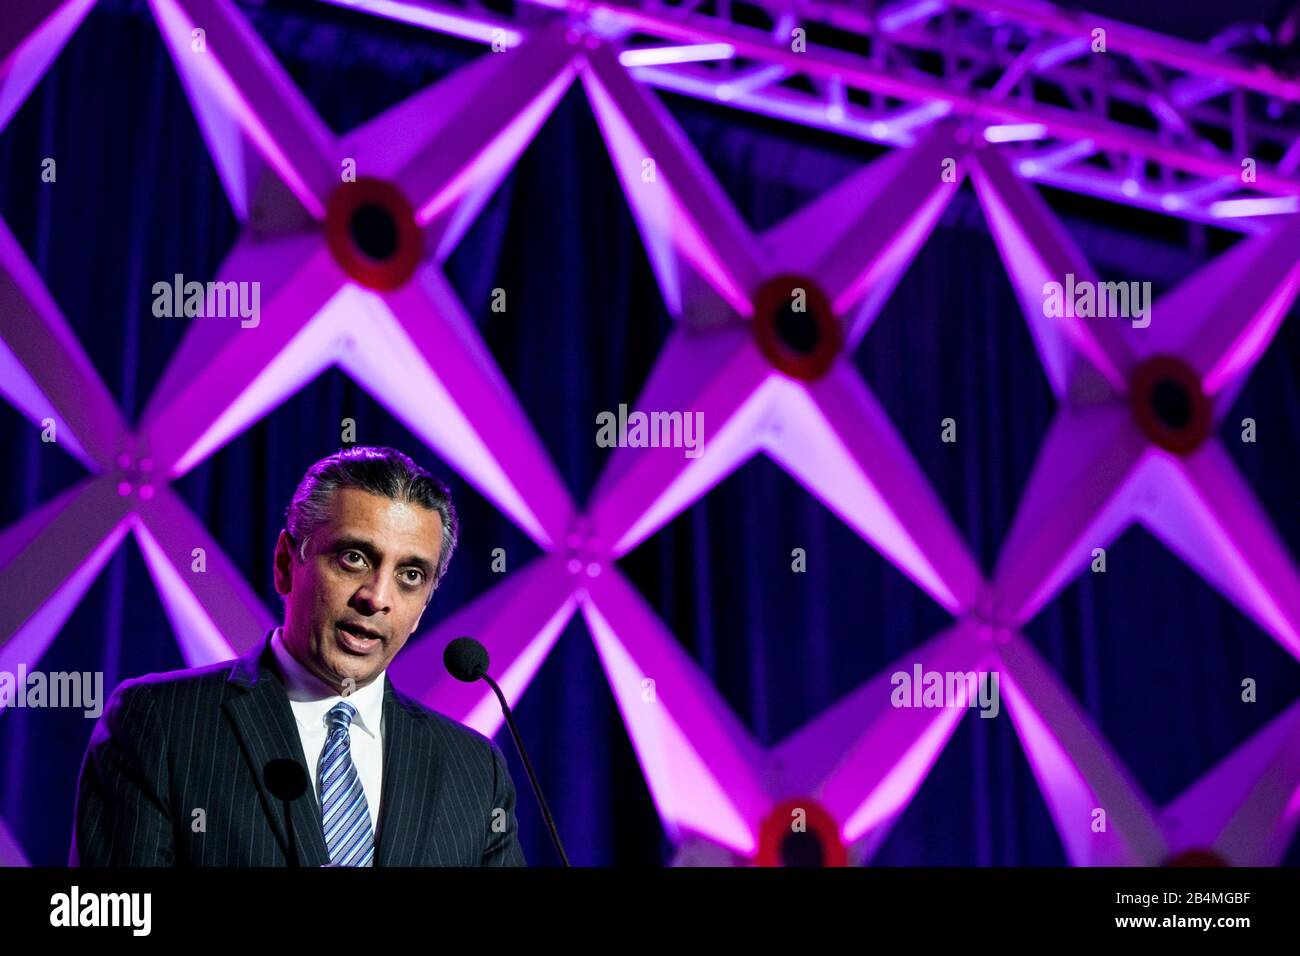 Raj Subramaniam, President, Chief Operating Officer and Director, FedEx Corporation, speaks at the U.S. Chamber of Commerce Aviation Summit in Washing Stock Photo